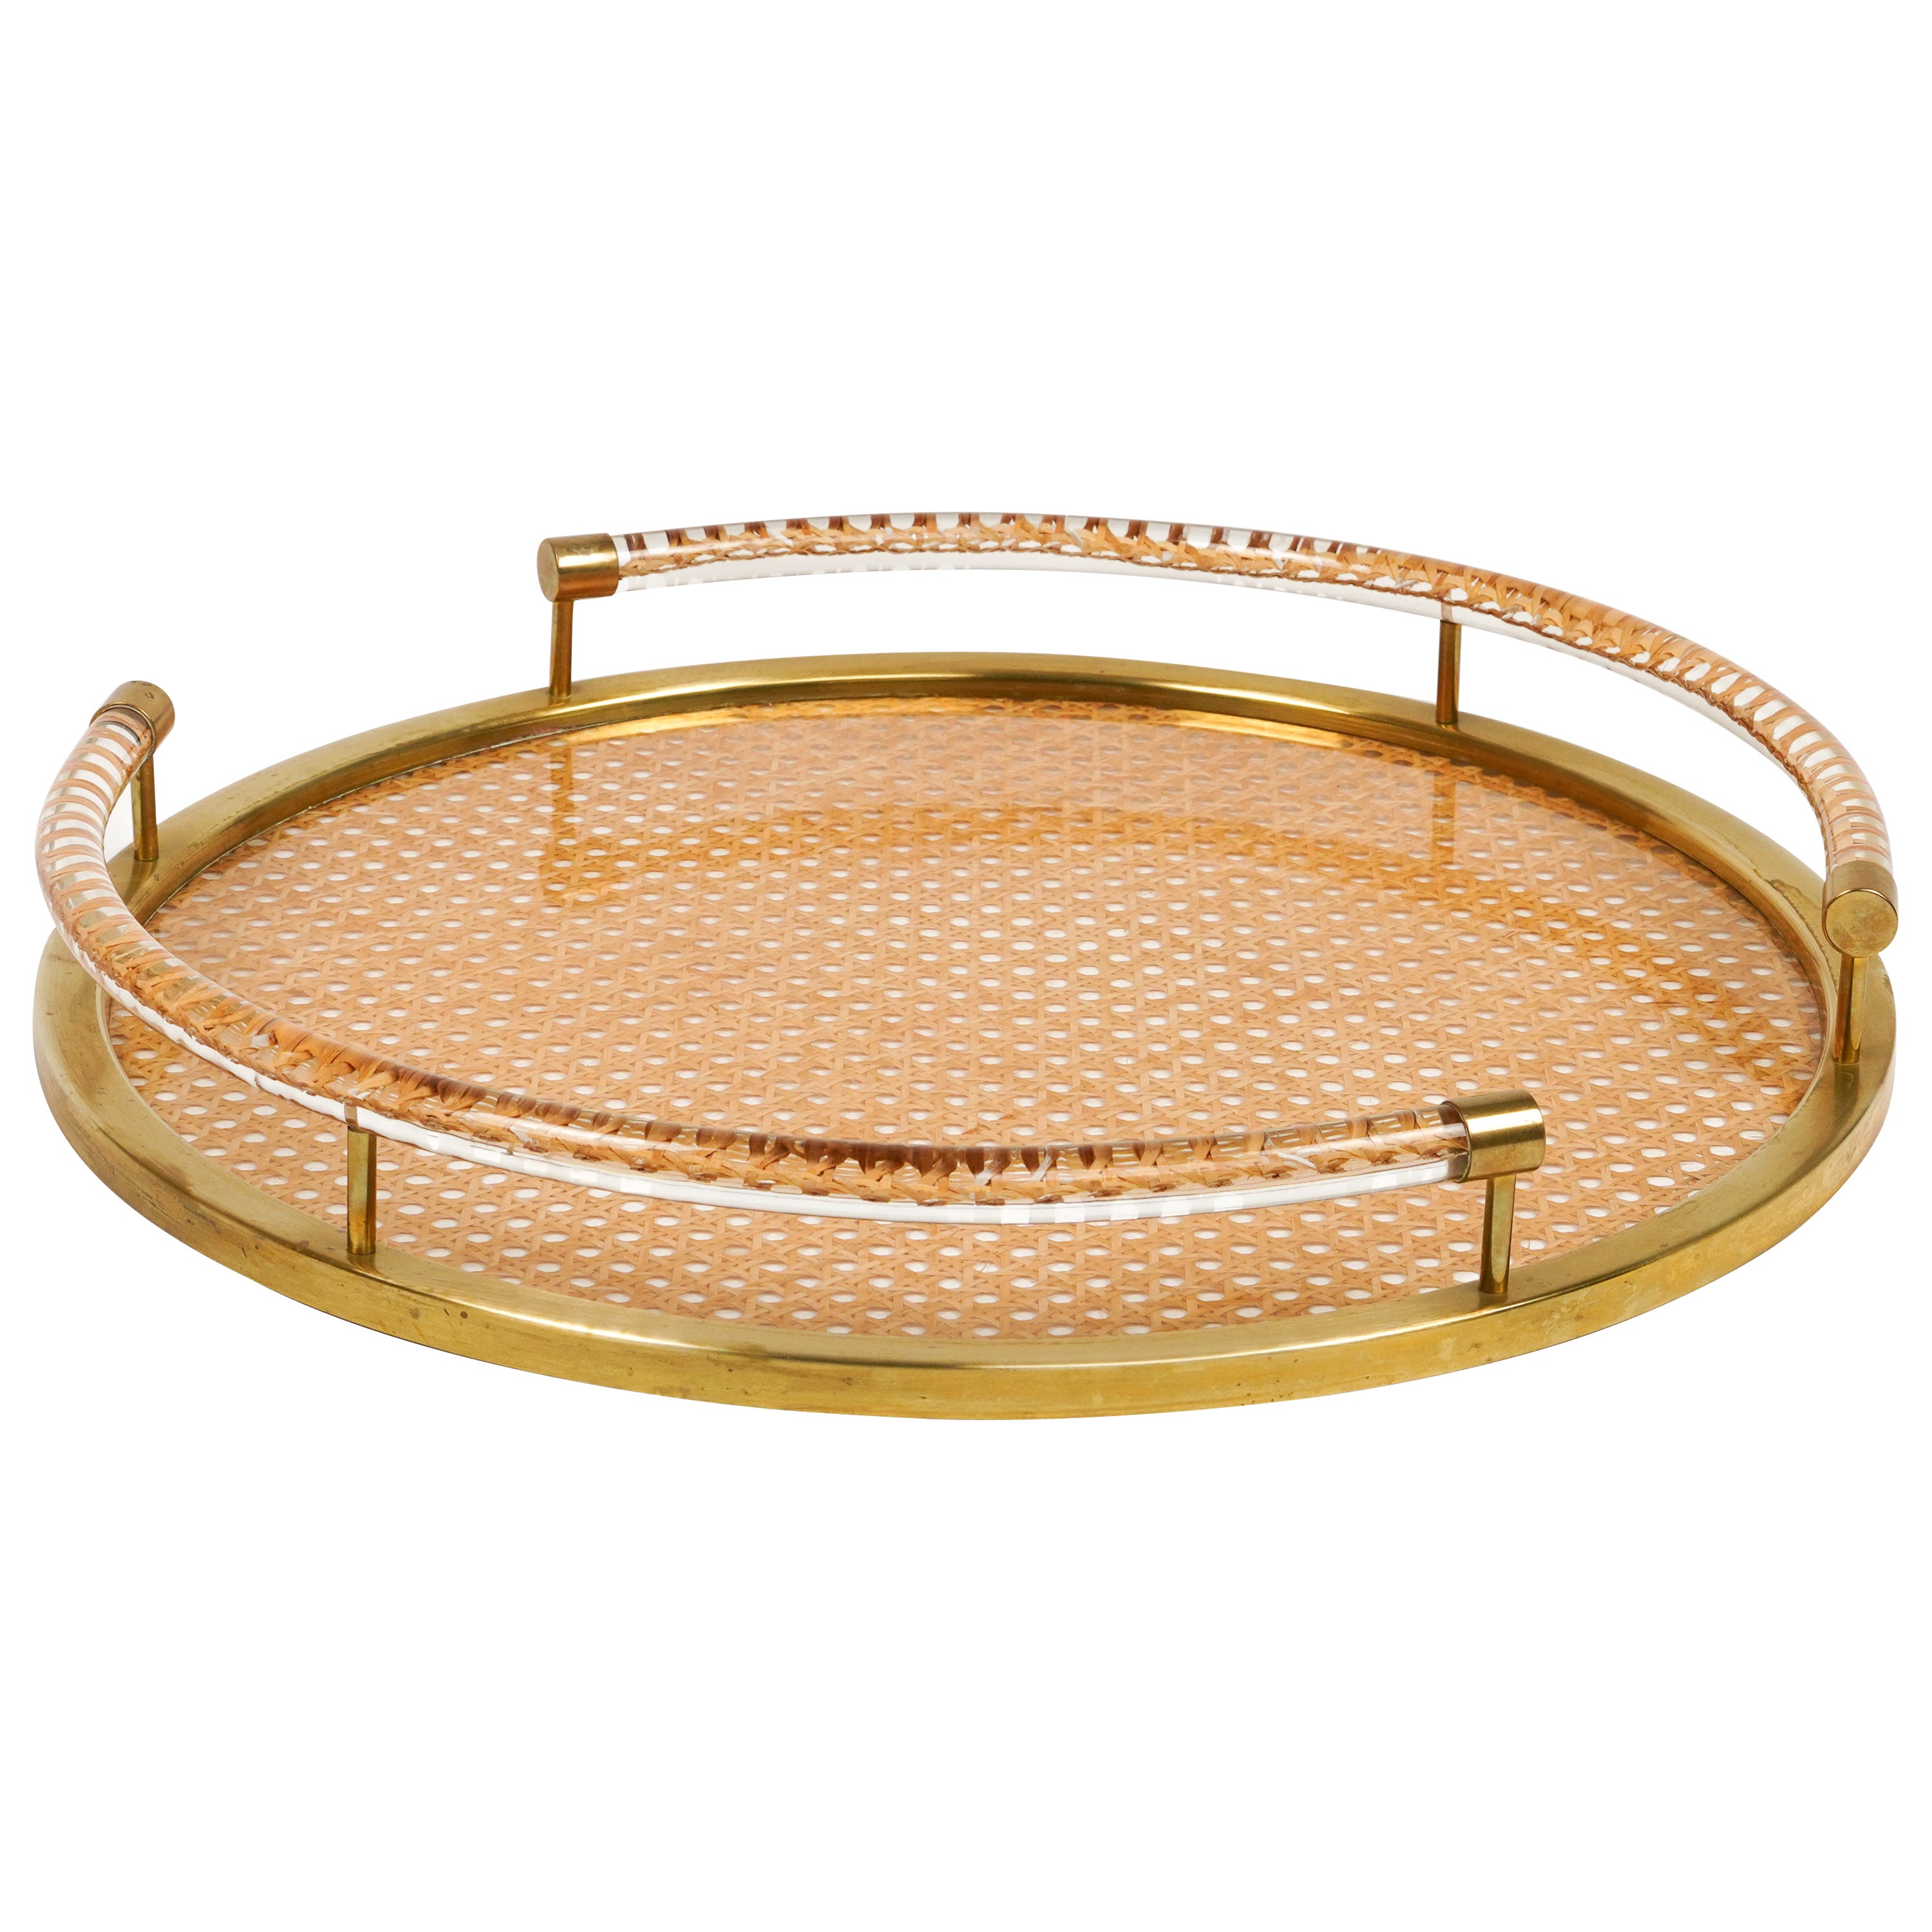 Round Serving Tray in Lucite, Rattan and Brass Christian Dior Style, Italy 1970s